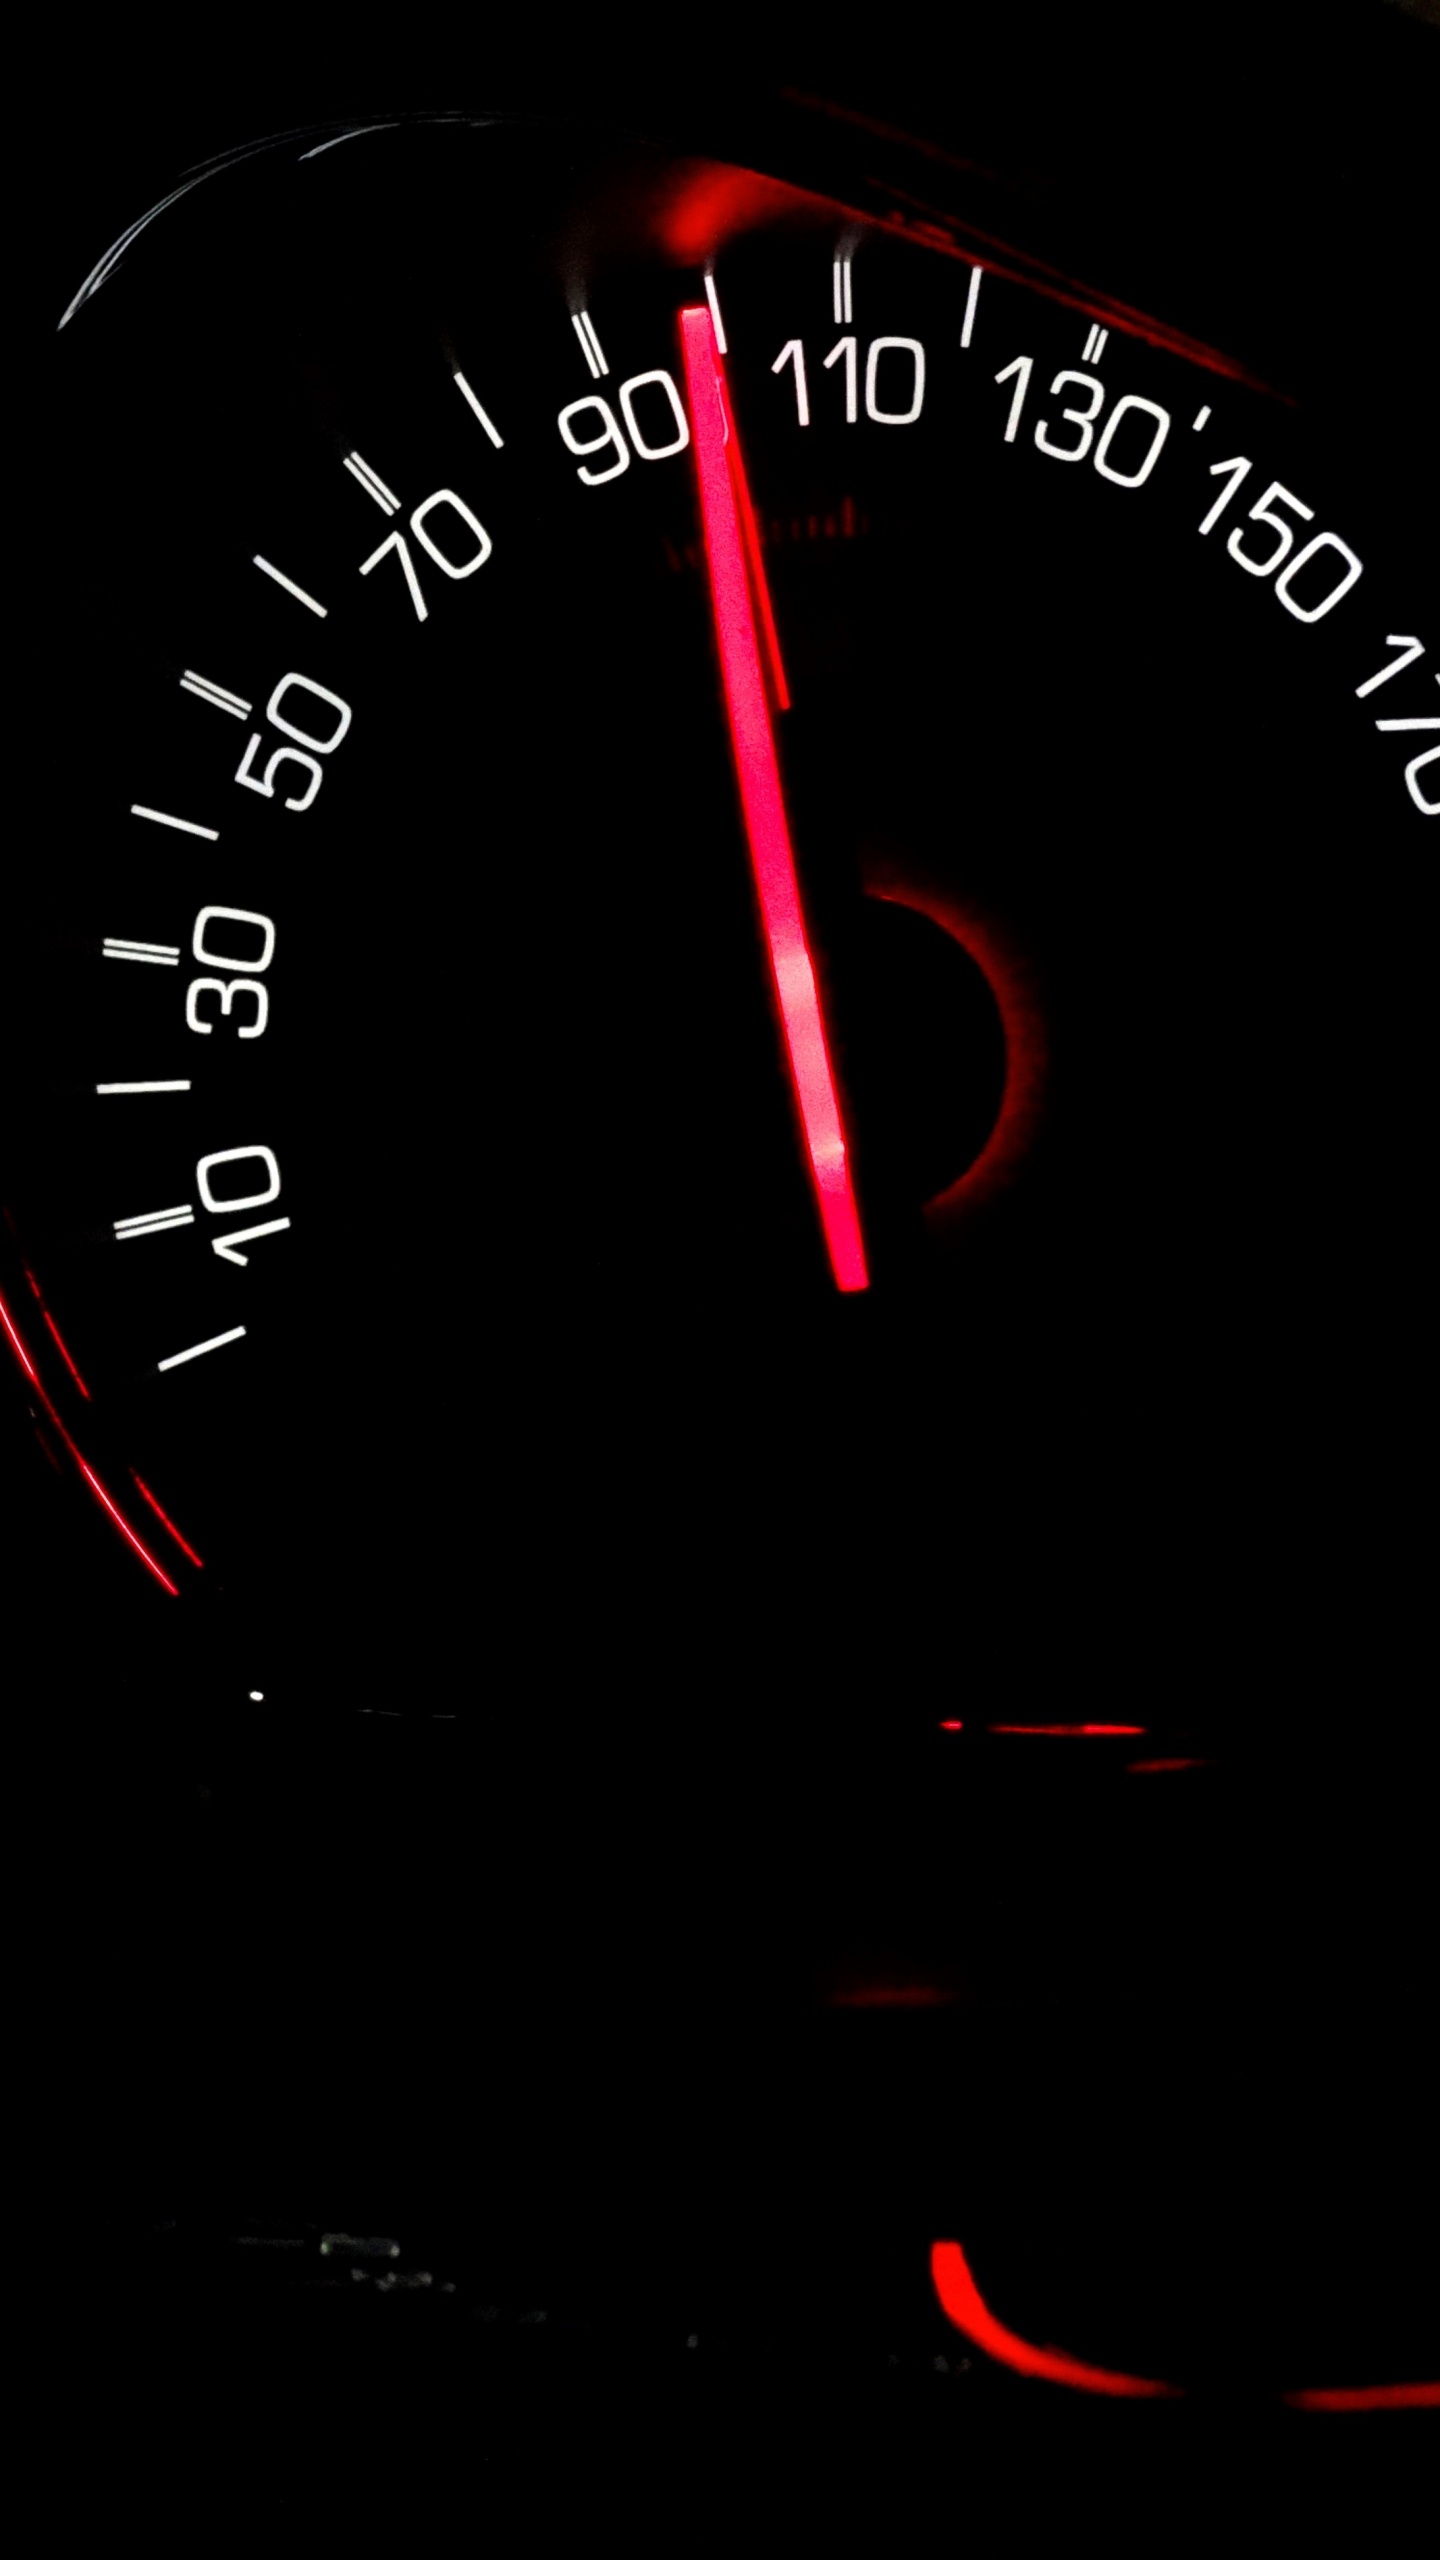 Black and Red Speedometer at 0. Wallpaper in 1440x2560 Resolution